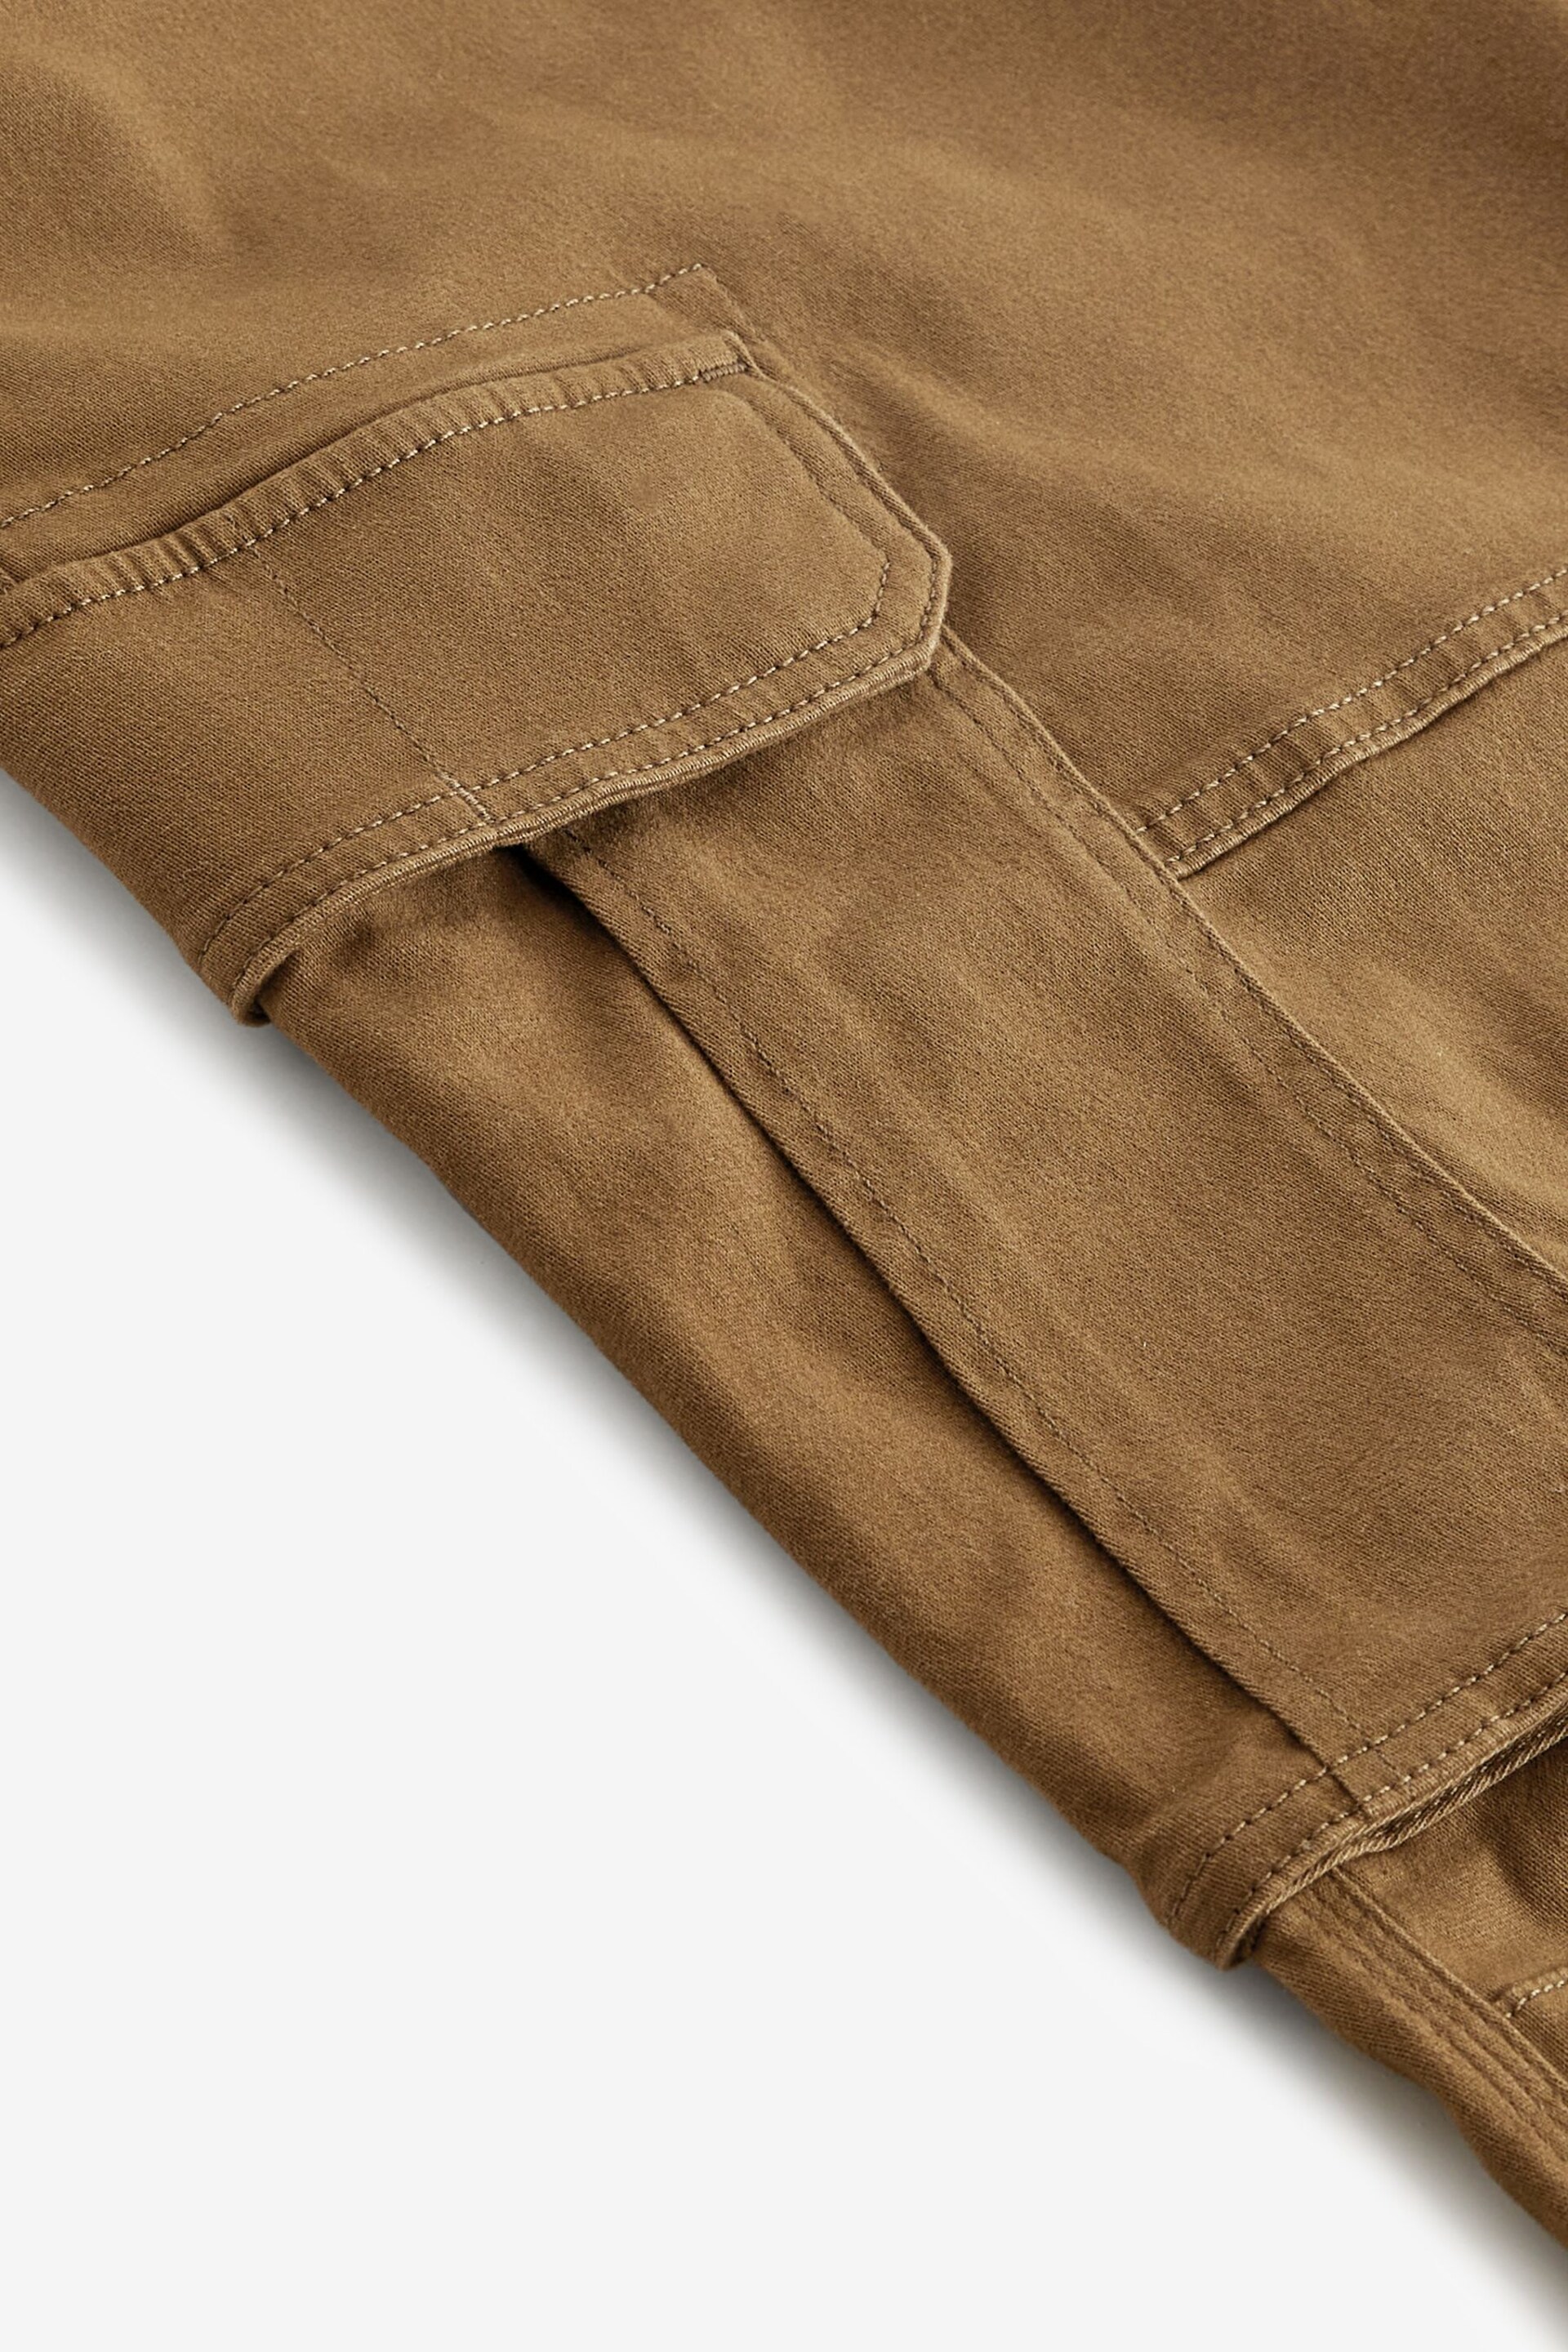 Tan Brown Slim Fit Cotton Stretch Cargo Trousers - Image 11 of 11